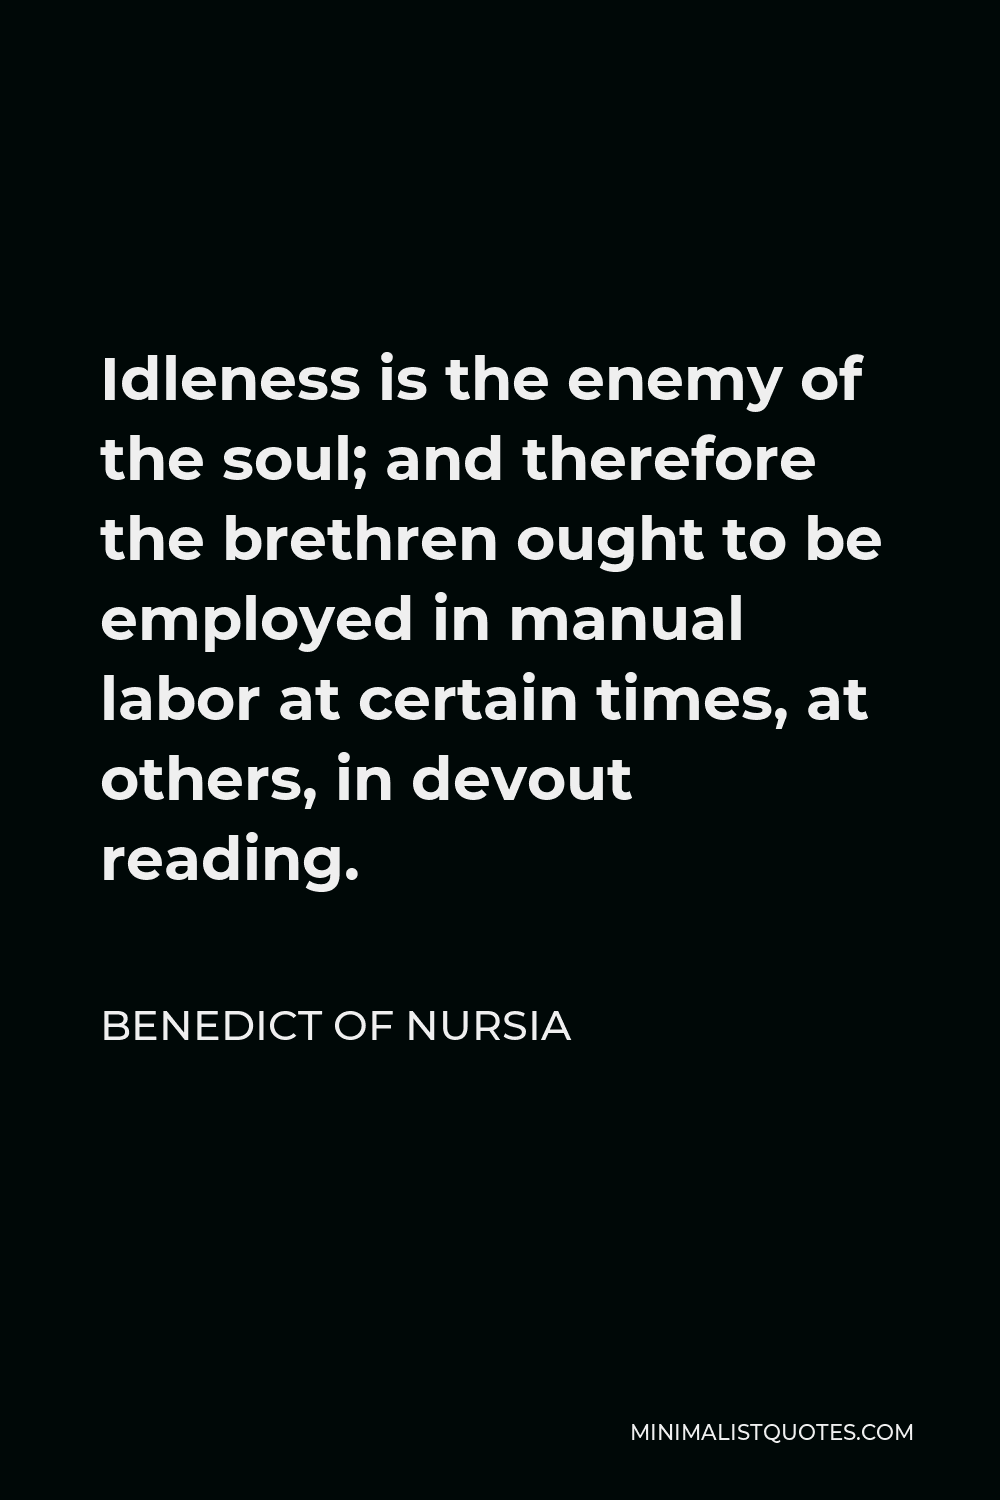 Benedict of Nursia Quote - Idleness is the enemy of the soul; and therefore the brethren ought to be employed in manual labor at certain times, at others, in devout reading.